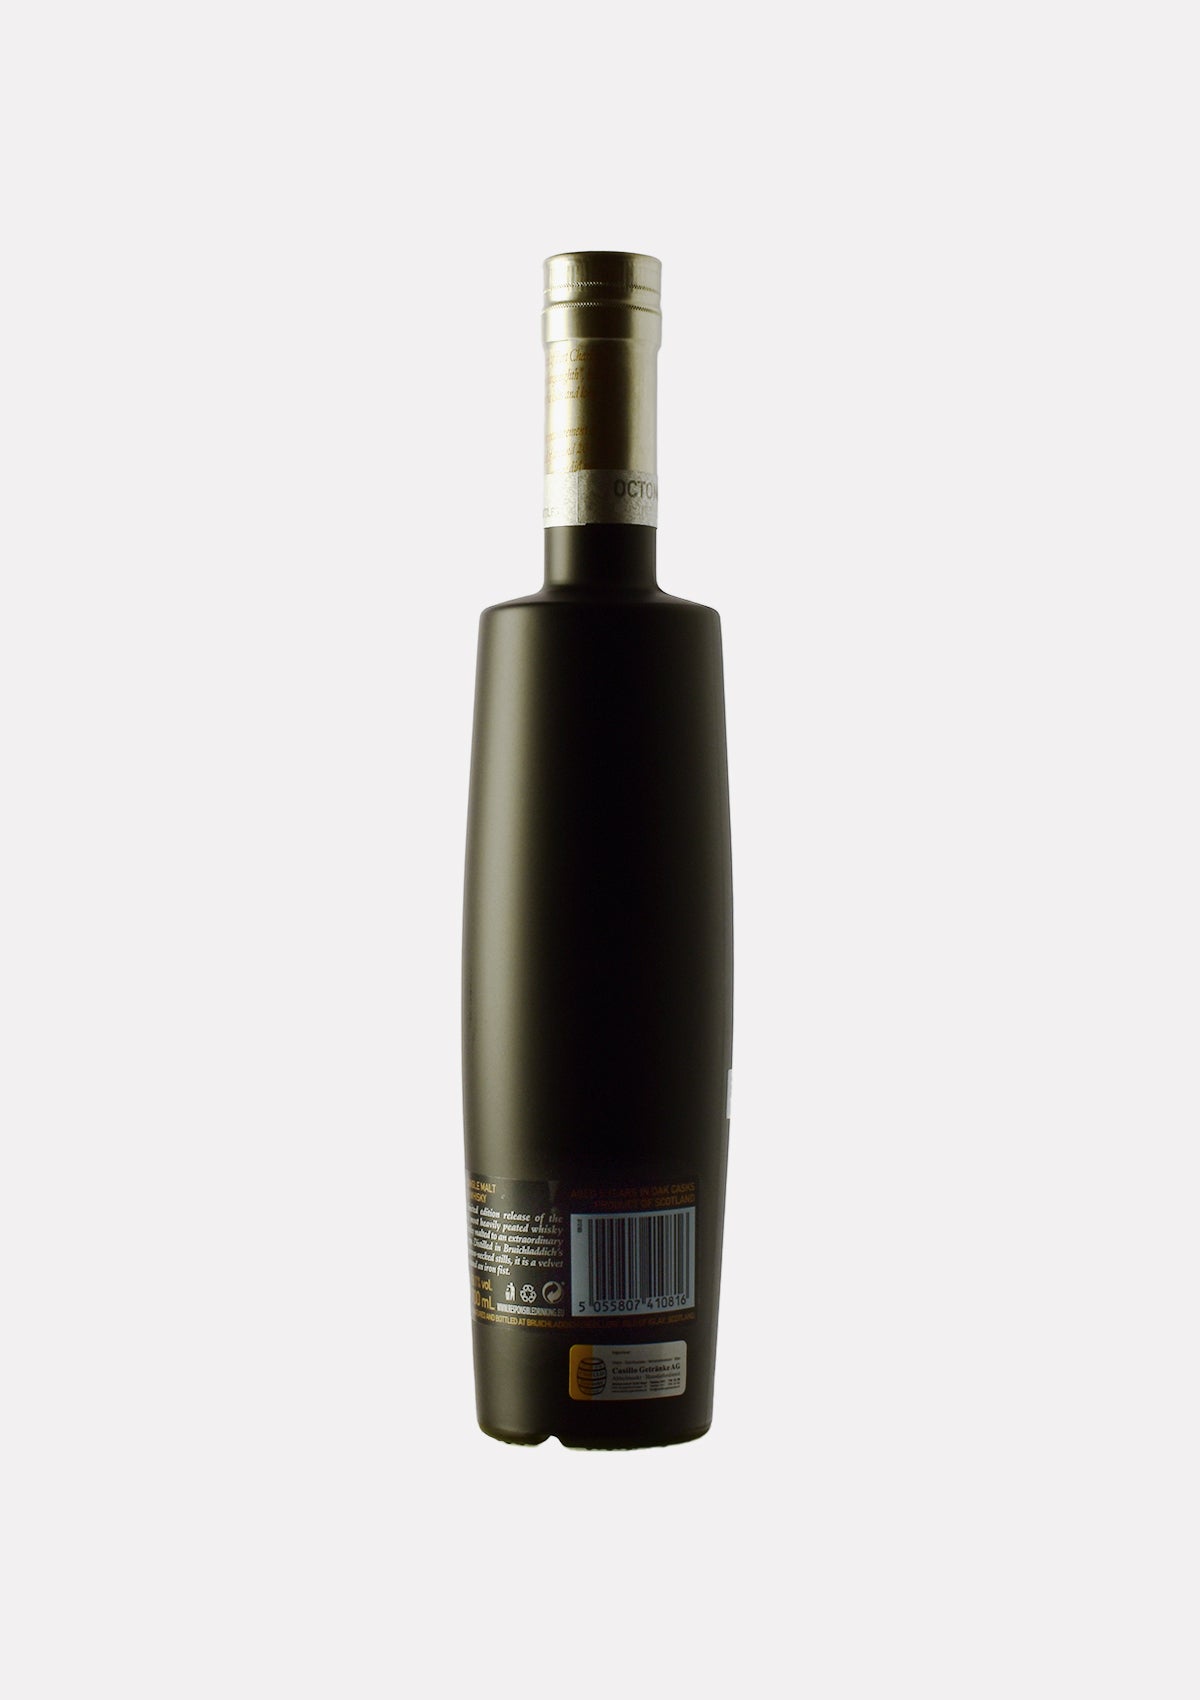 Octomore 09.1 156 ppm